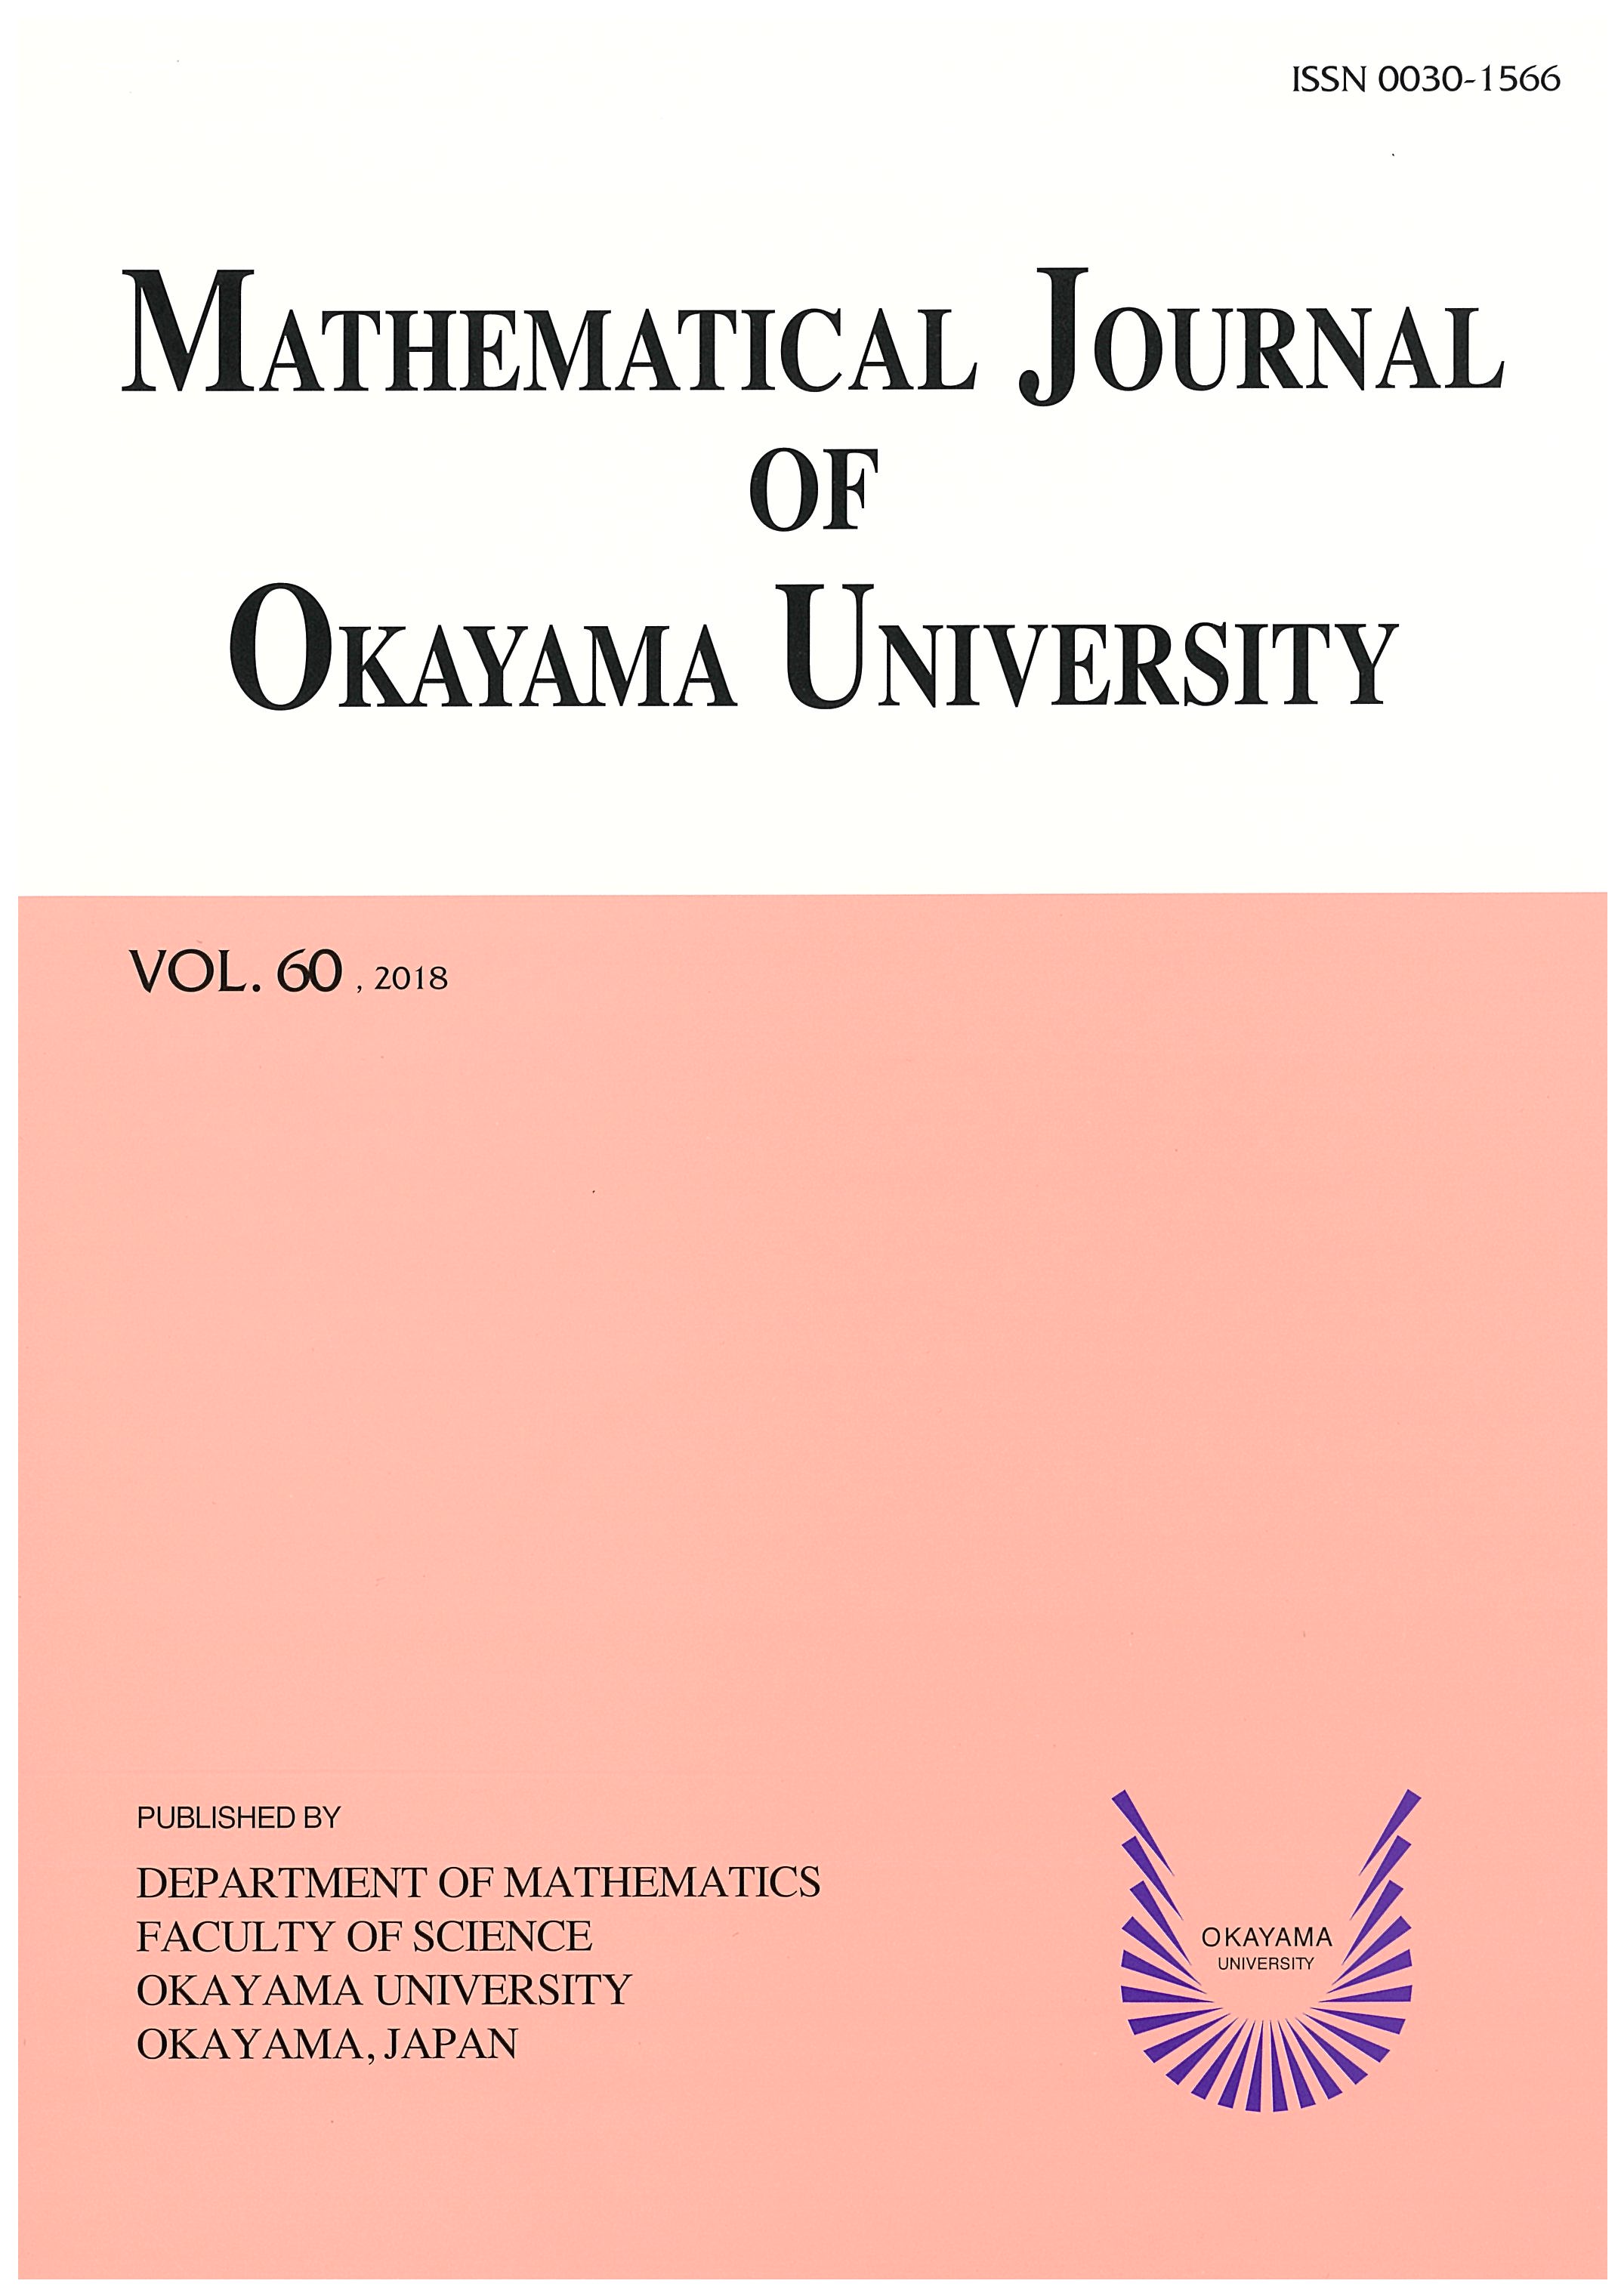 “International Mathematical Journal” published annually, with many contributions from overseas.